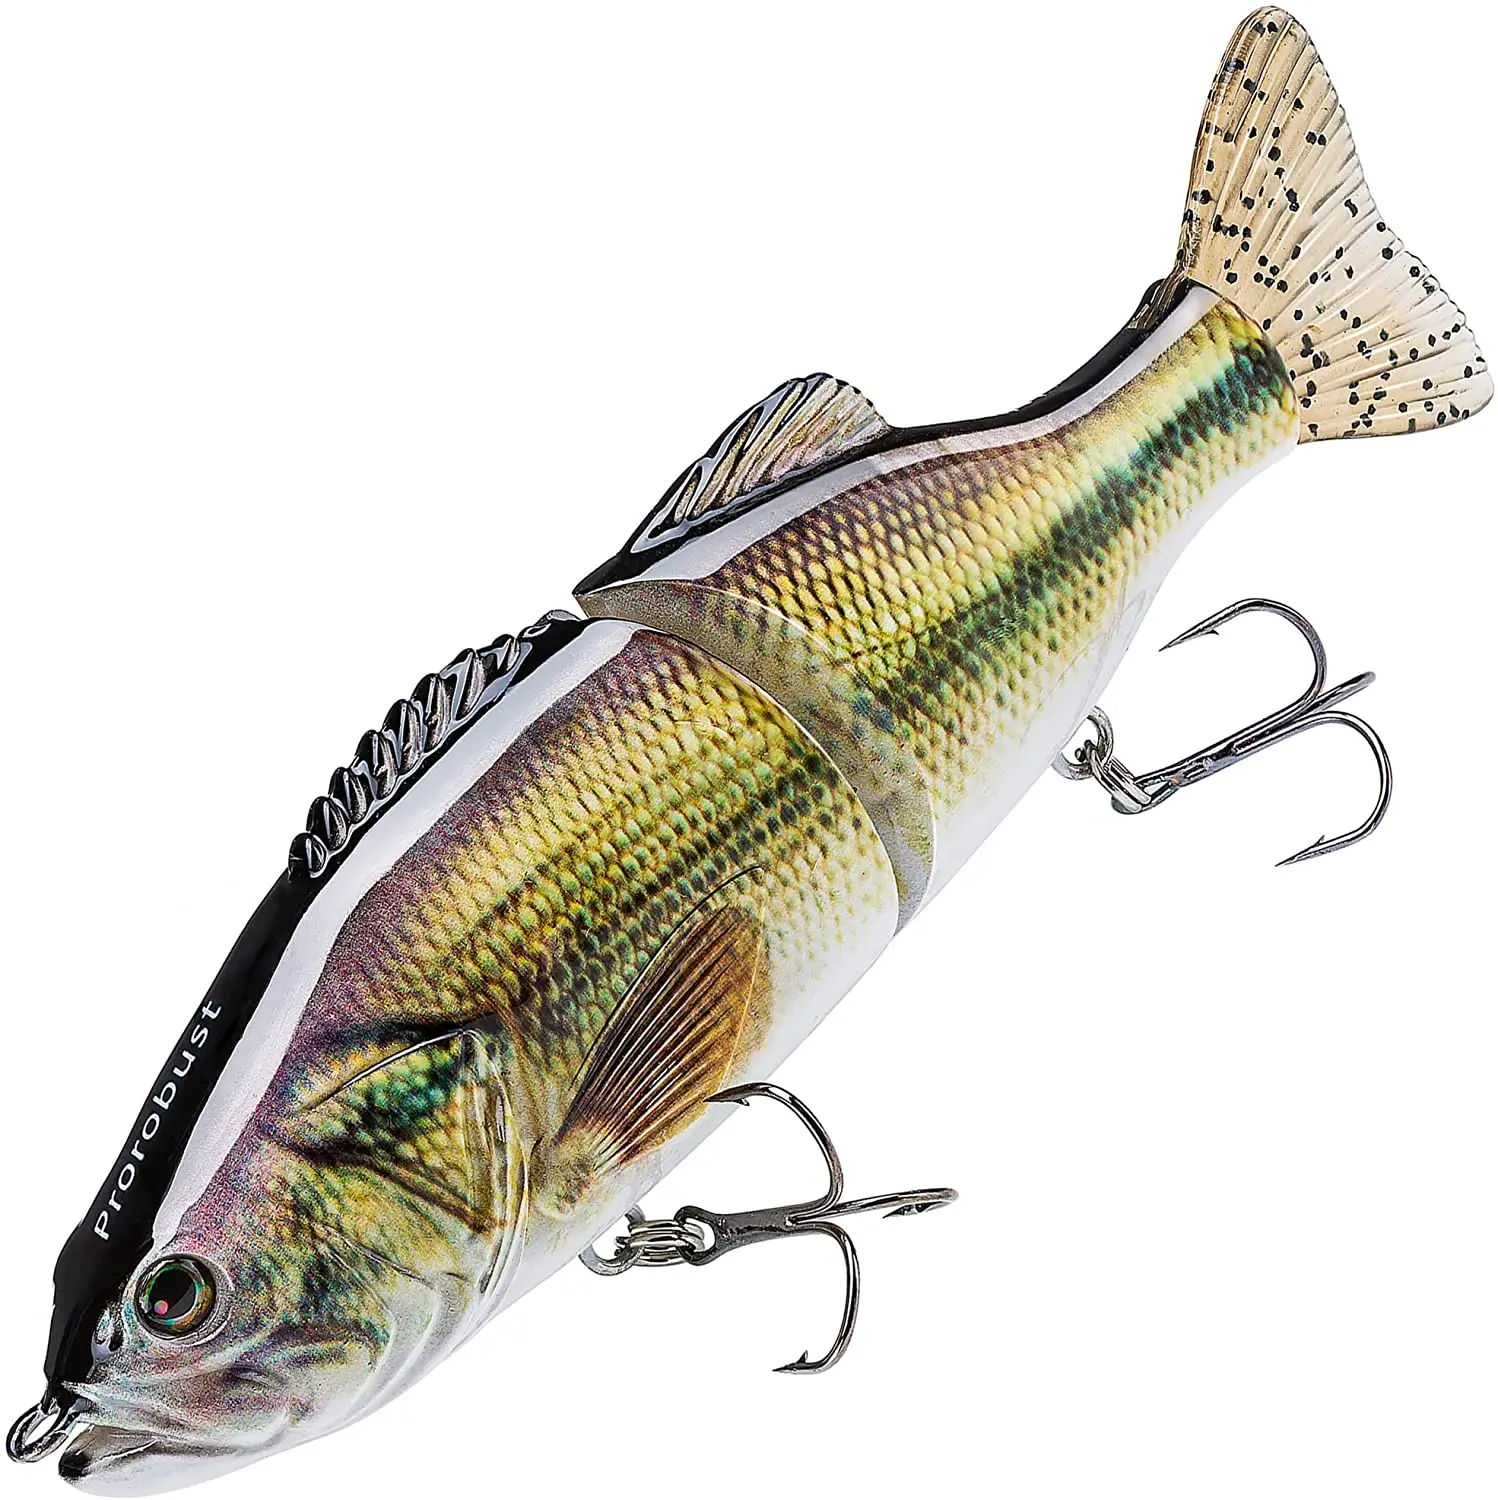 

170mm 87g Glide Bait Hard Body 2 Section Joined Big Game Sea Fishing Lure Swimbait Fishing Lures